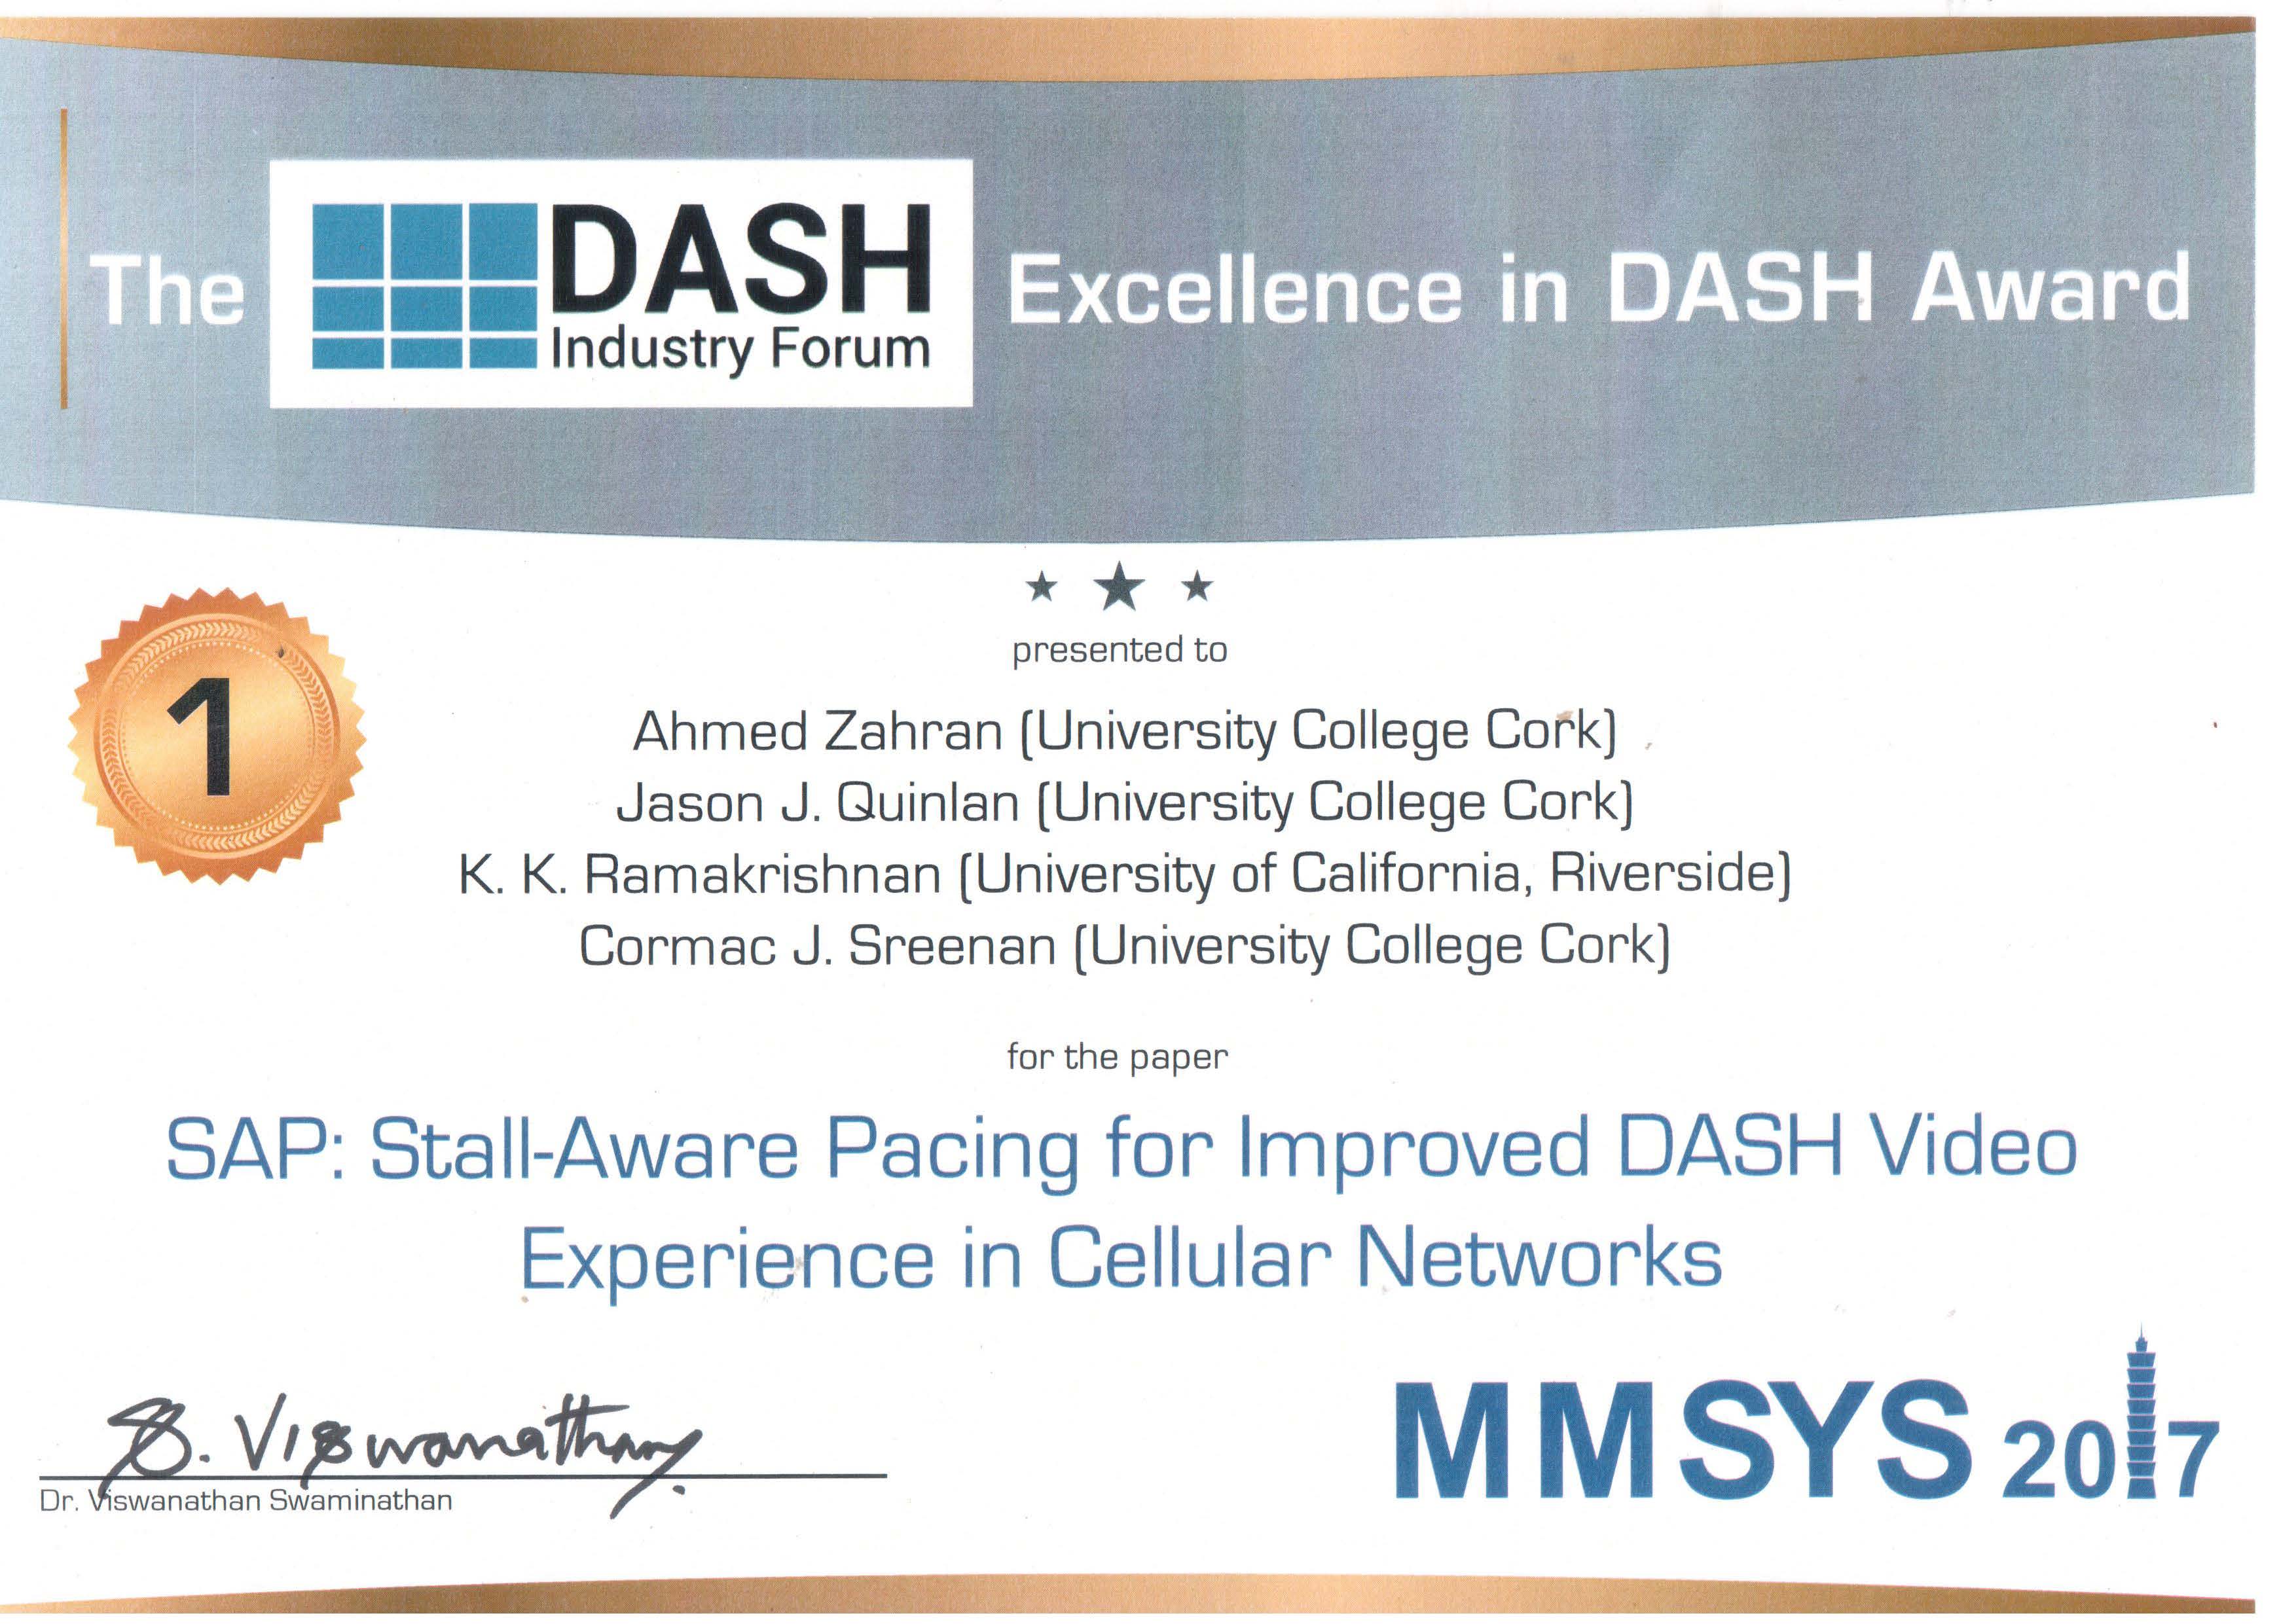 Winner of the 'Excellence in DASH Award' at ACM MMSys 2017